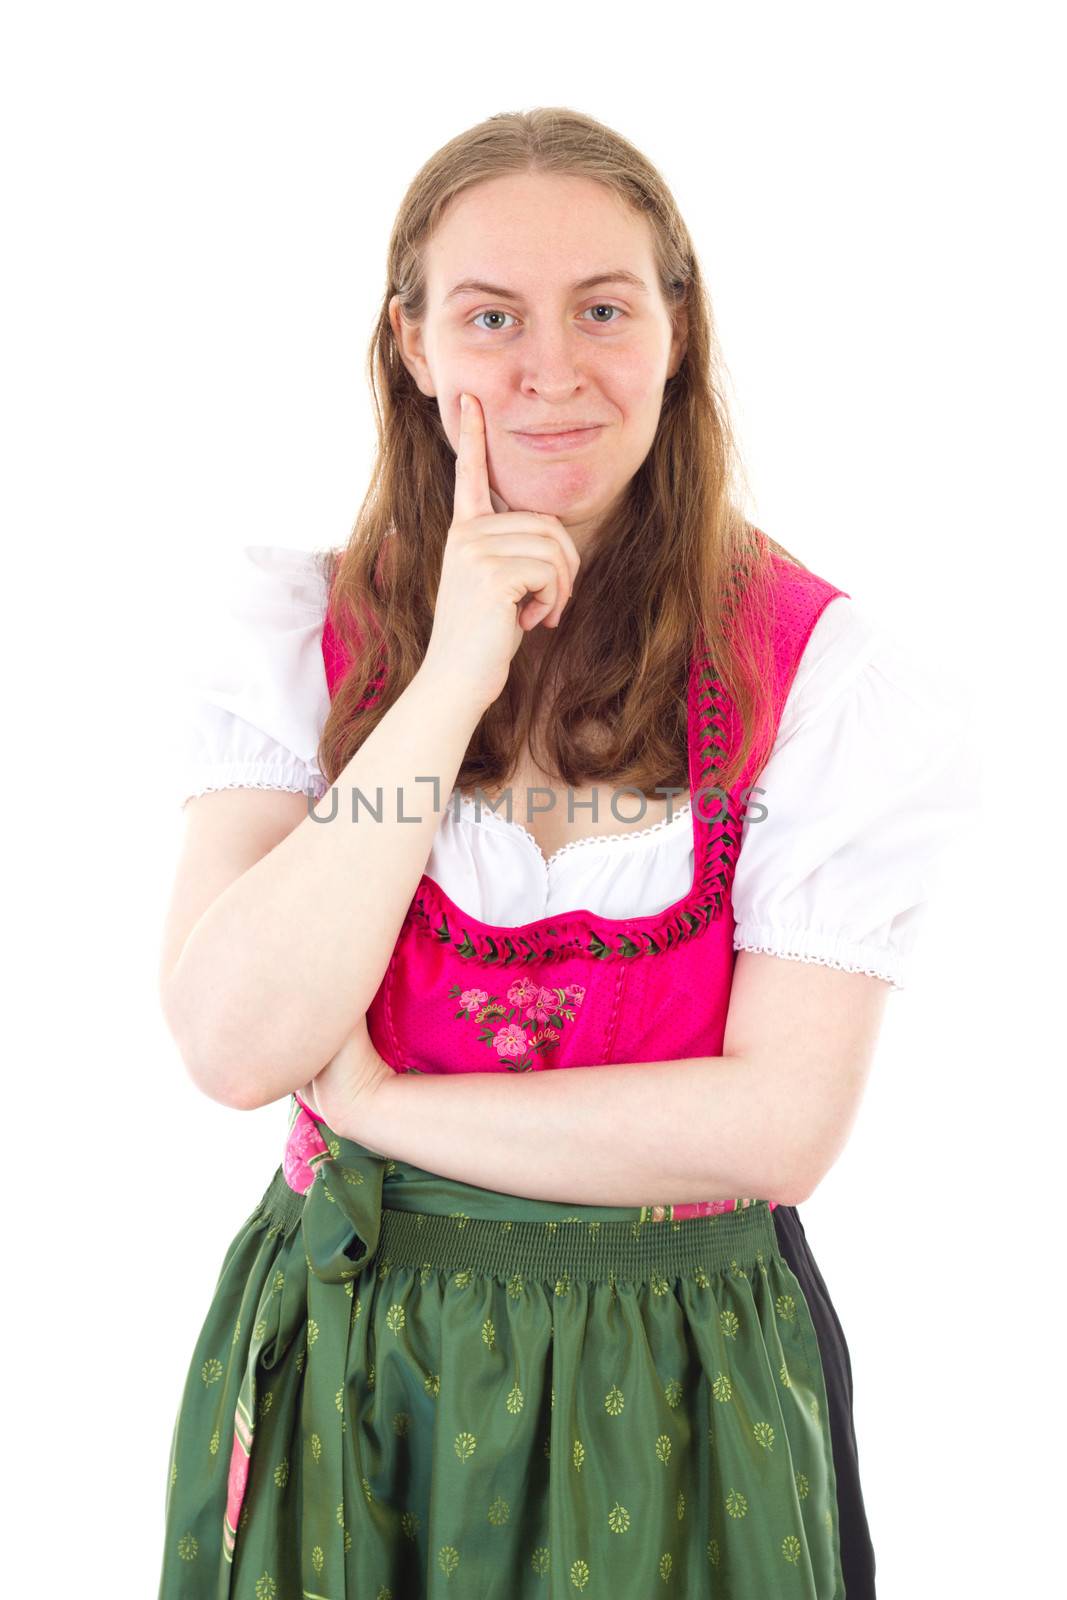 Lucky woman in dirndl has found the right idea